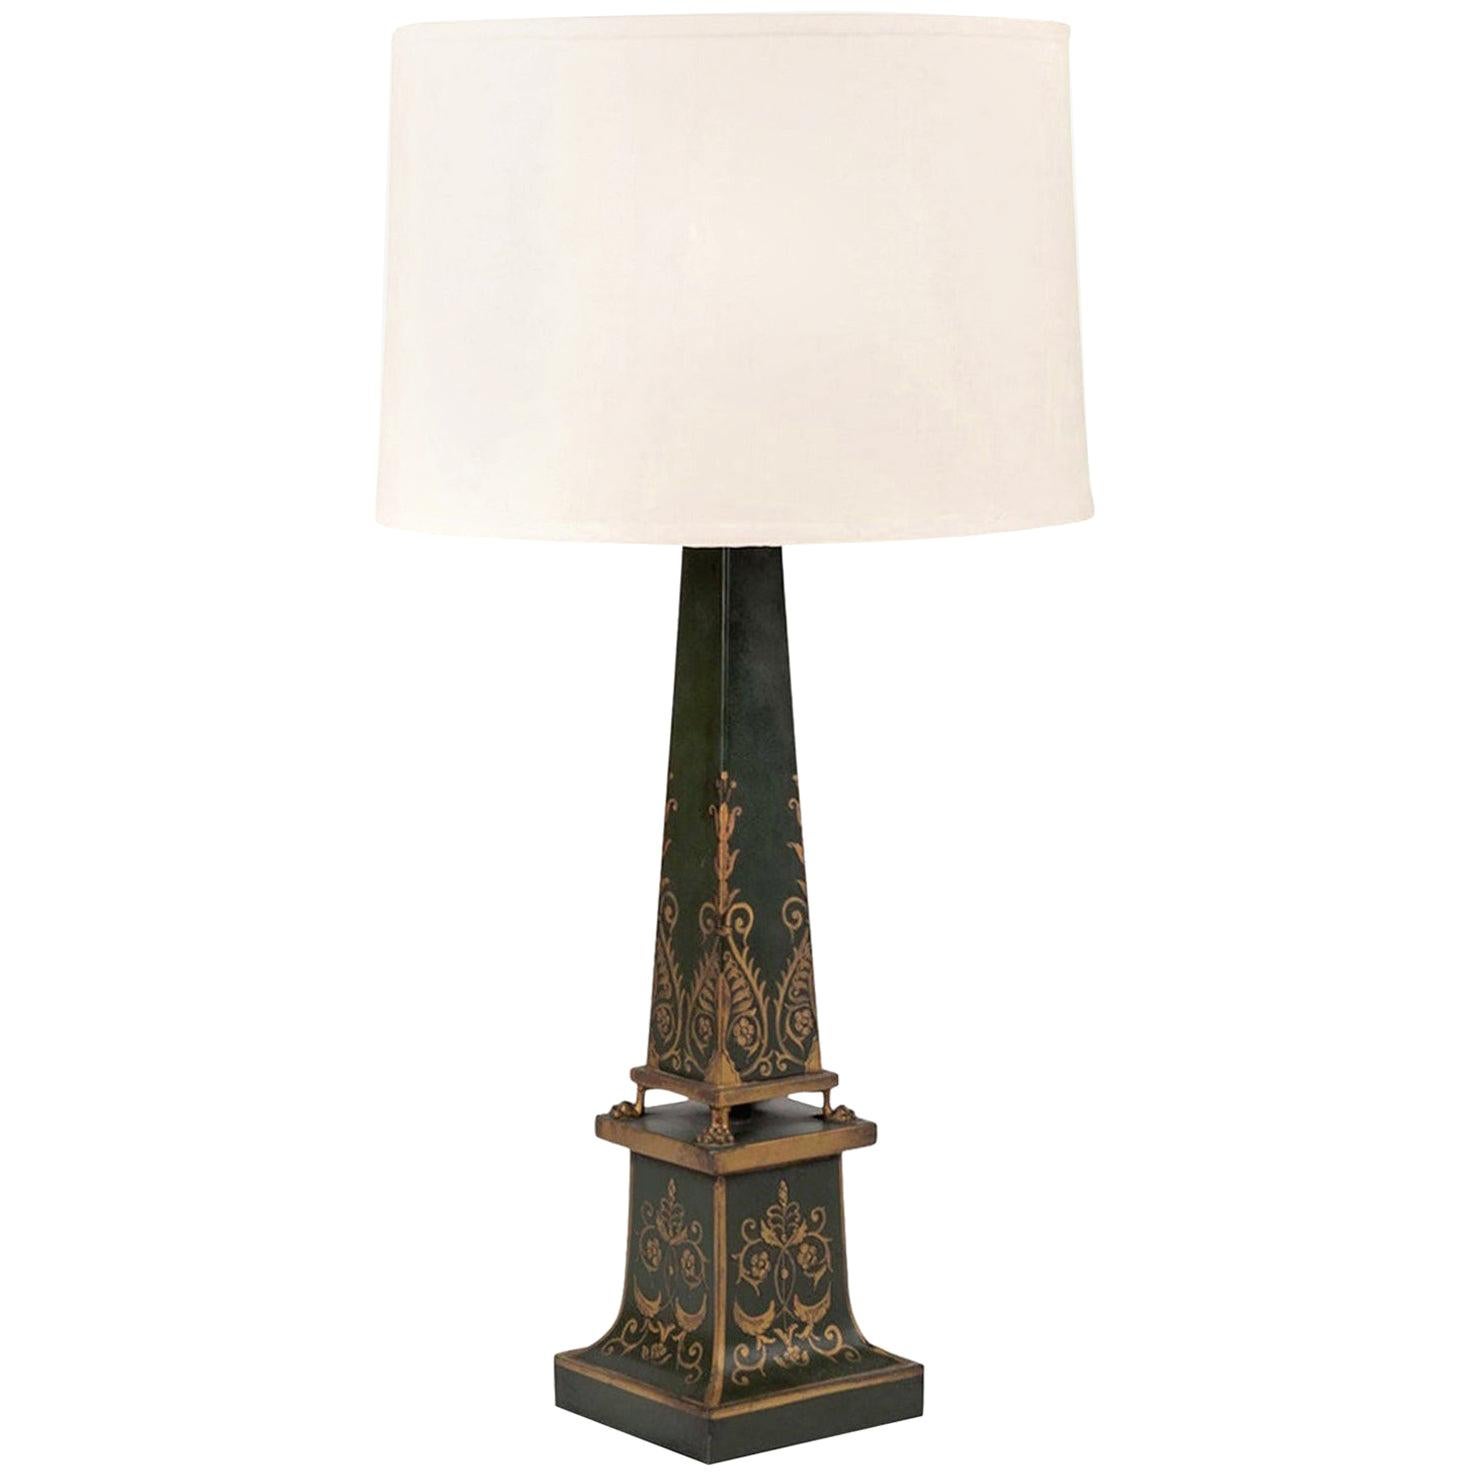 Antique green-painted tole table lamp with gold decoration, newly wired for use within the USA using all UL listed parts. Includes complimentary linen shade (measurements include shade).